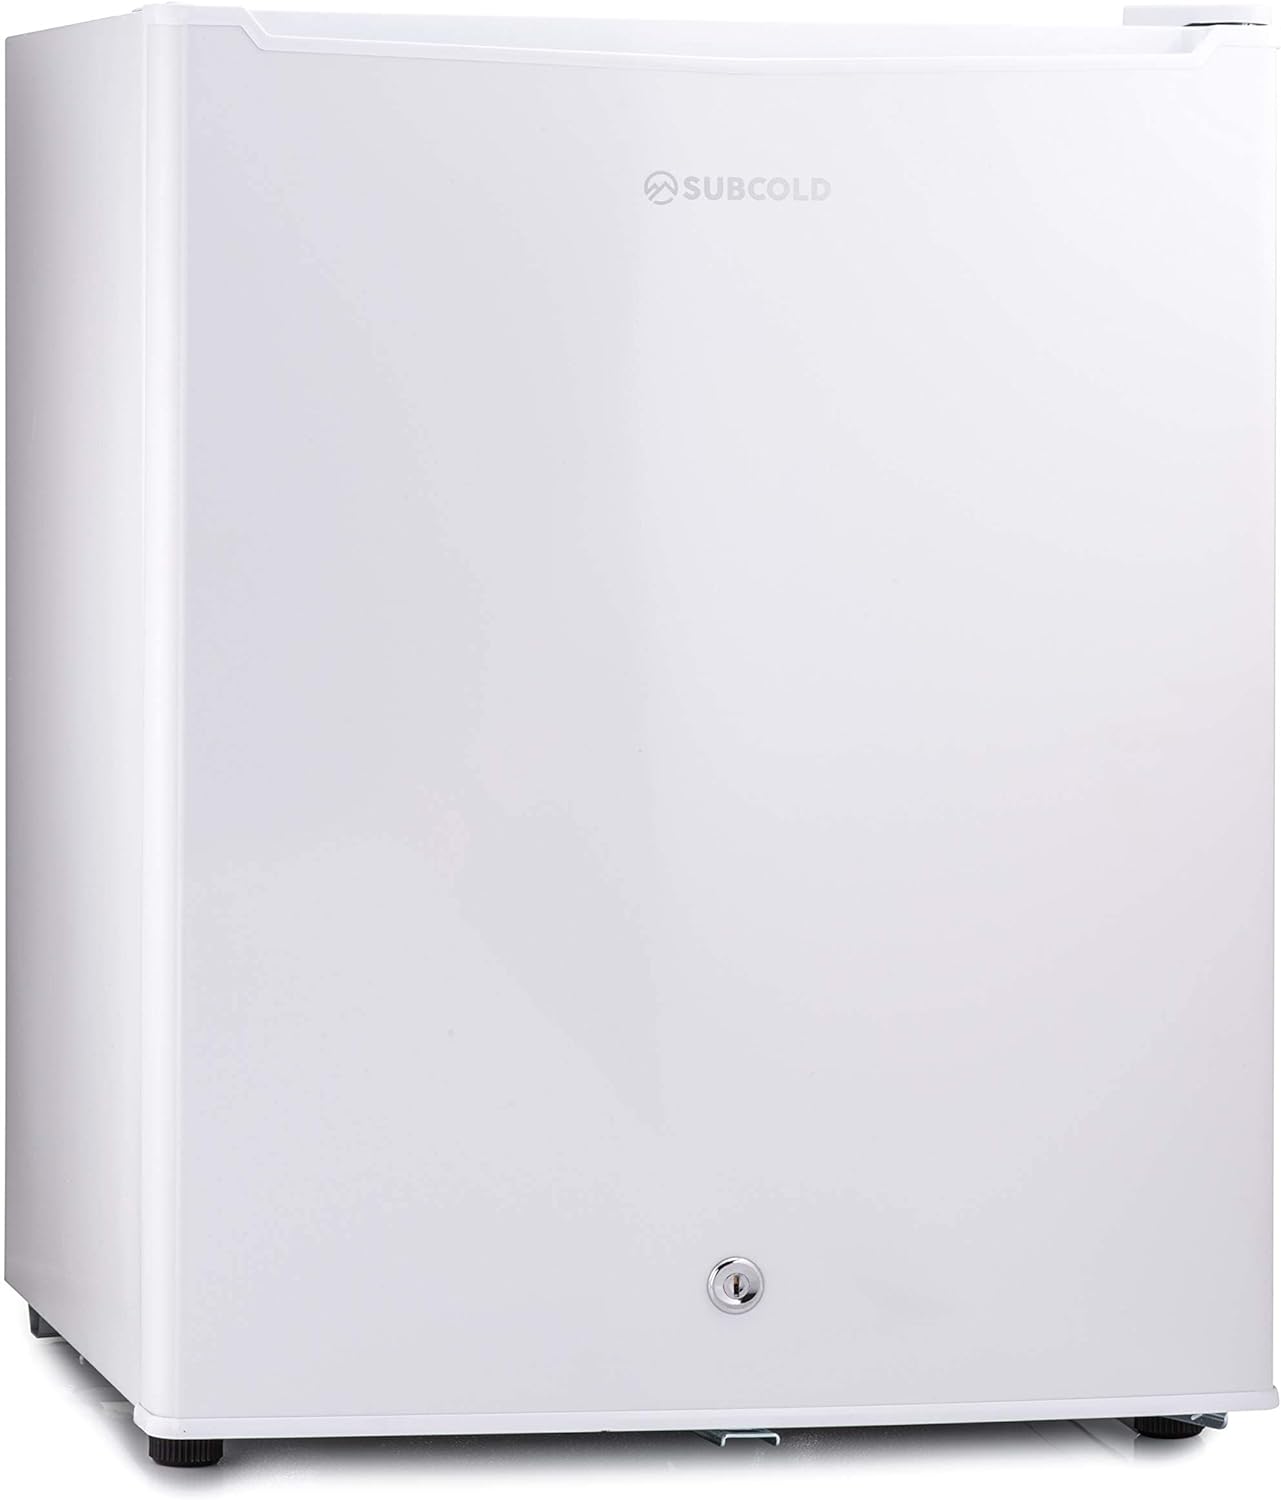 Subcold Eco100 LED Under - Counter White Fridge | Freestanding Refrigerator | Solid Door with Chiller Box | LED Light + Lock & Key | Energy Efficient (100L, White) - Amazing Gadgets Outlet